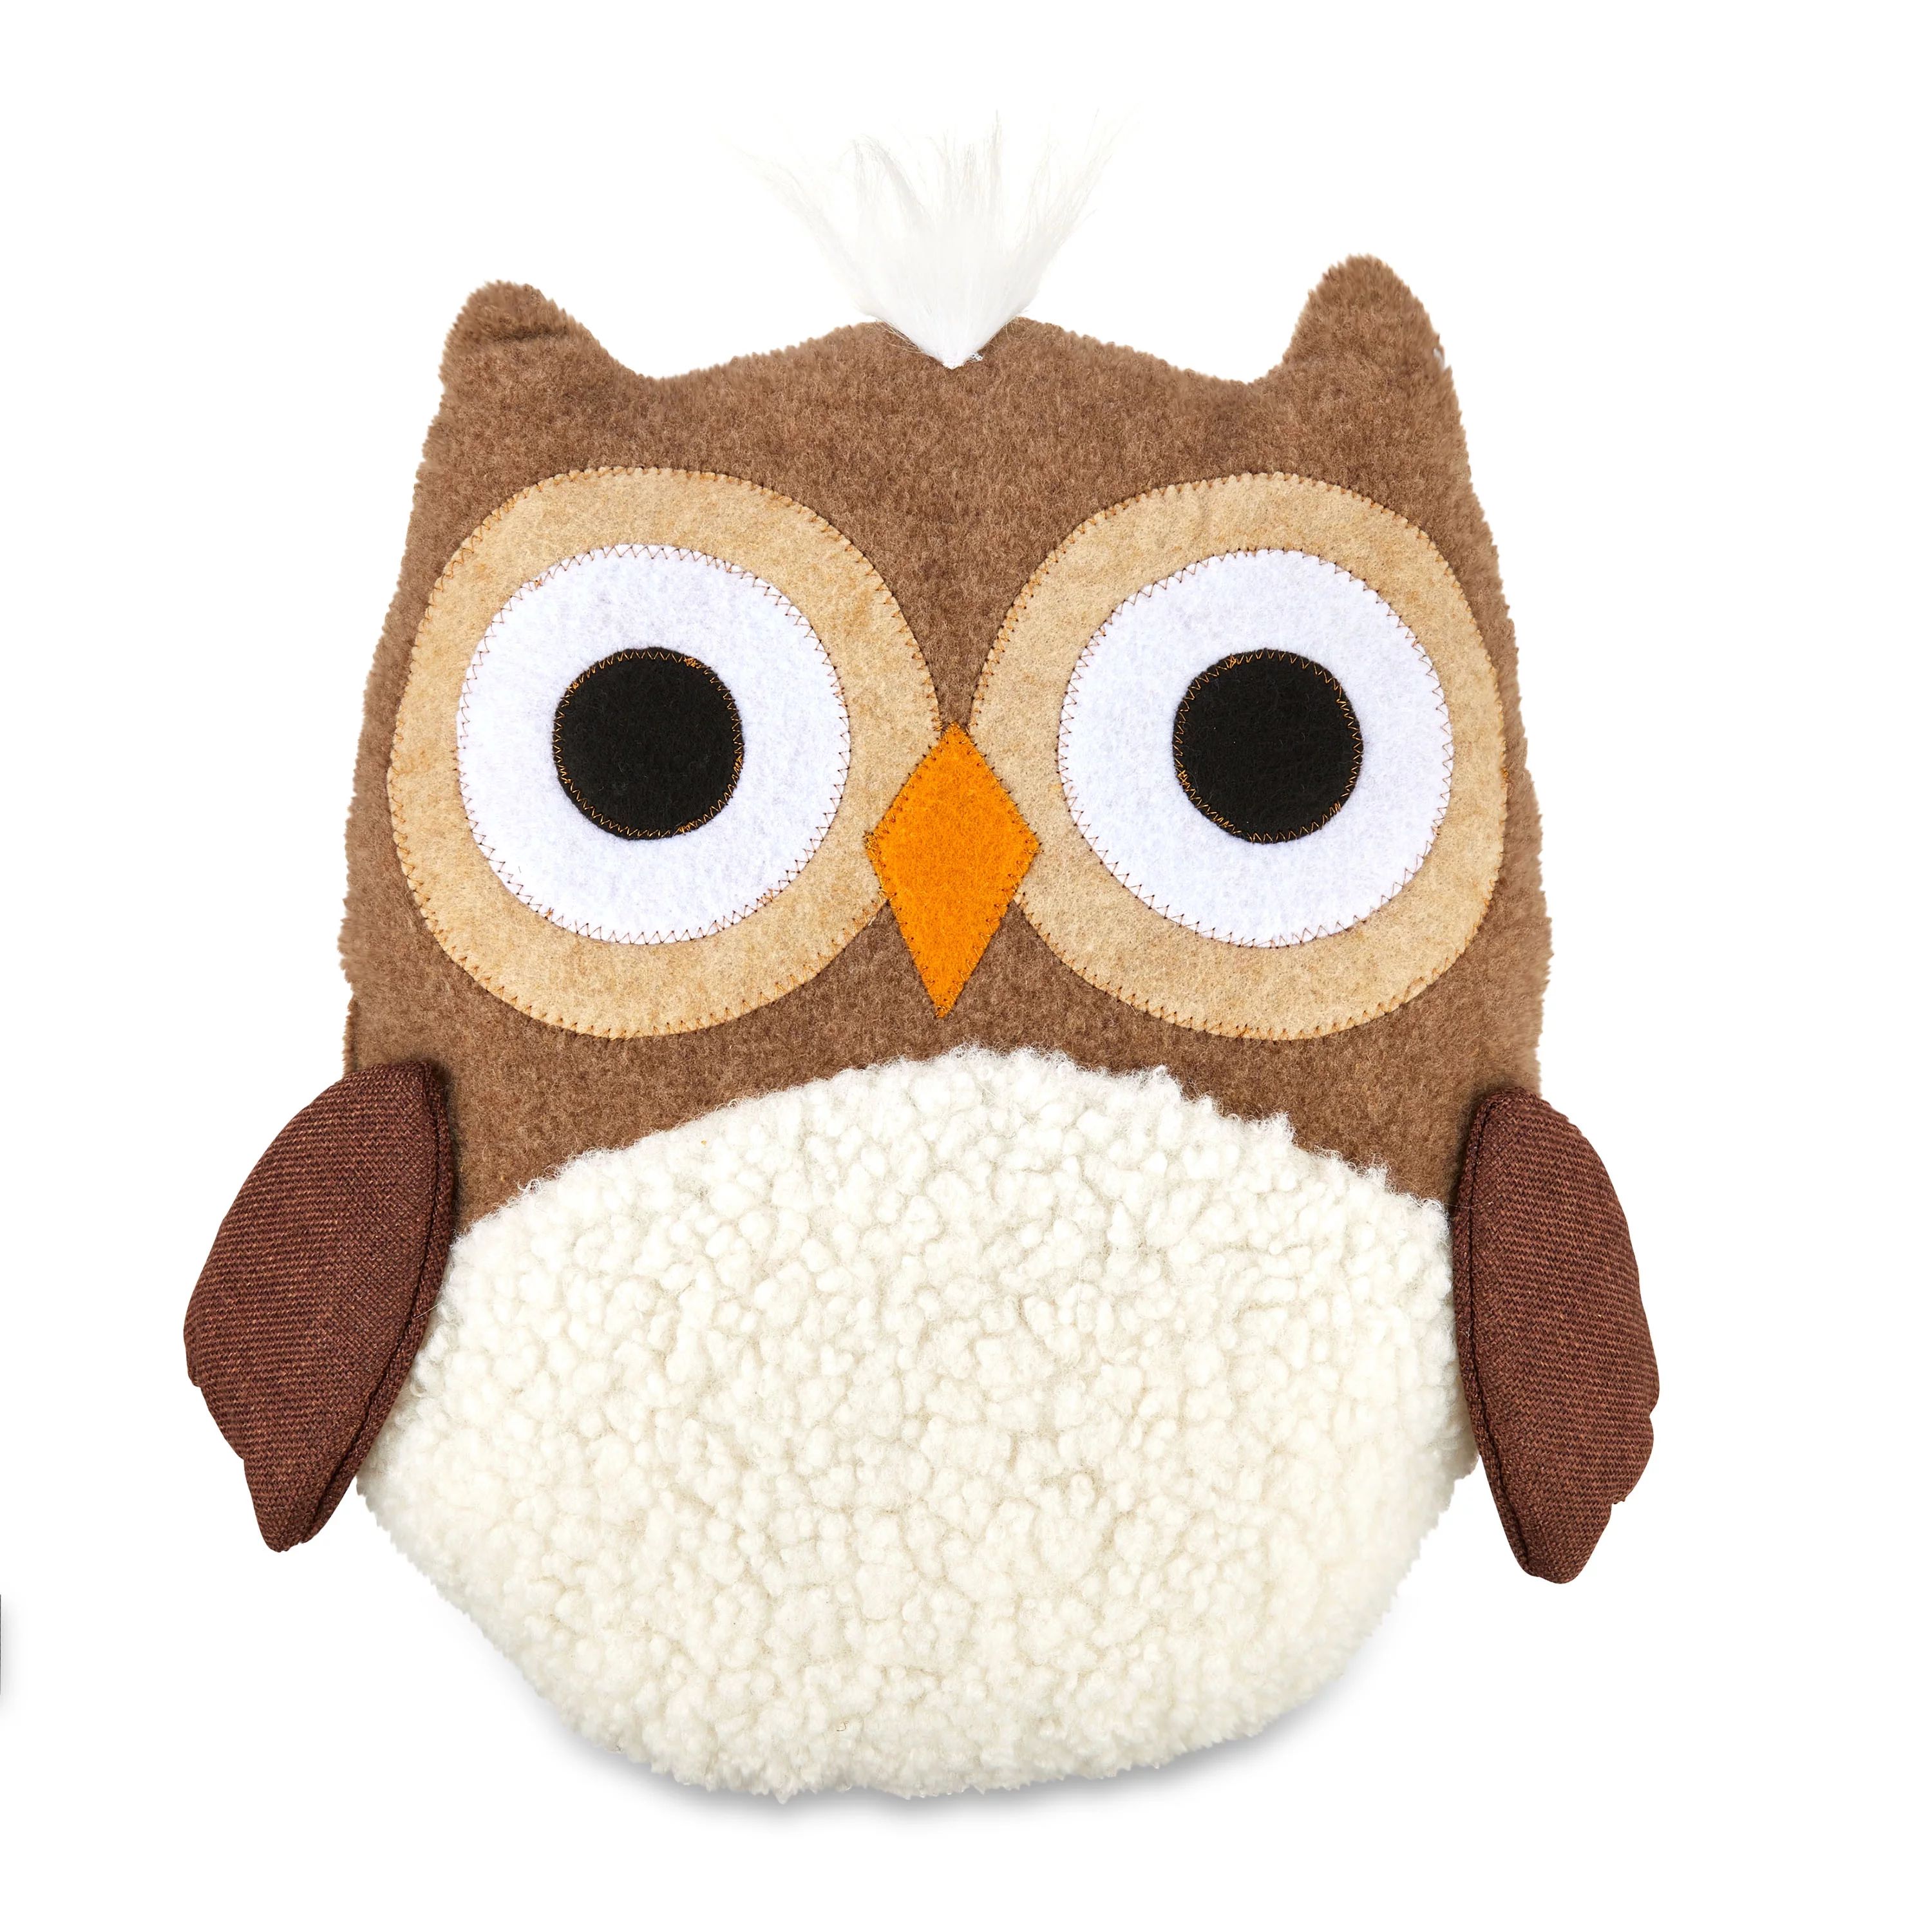 Harvest 13 in Brown Owl Decorative Pillow, Way to Celebrate | Walmart (US)